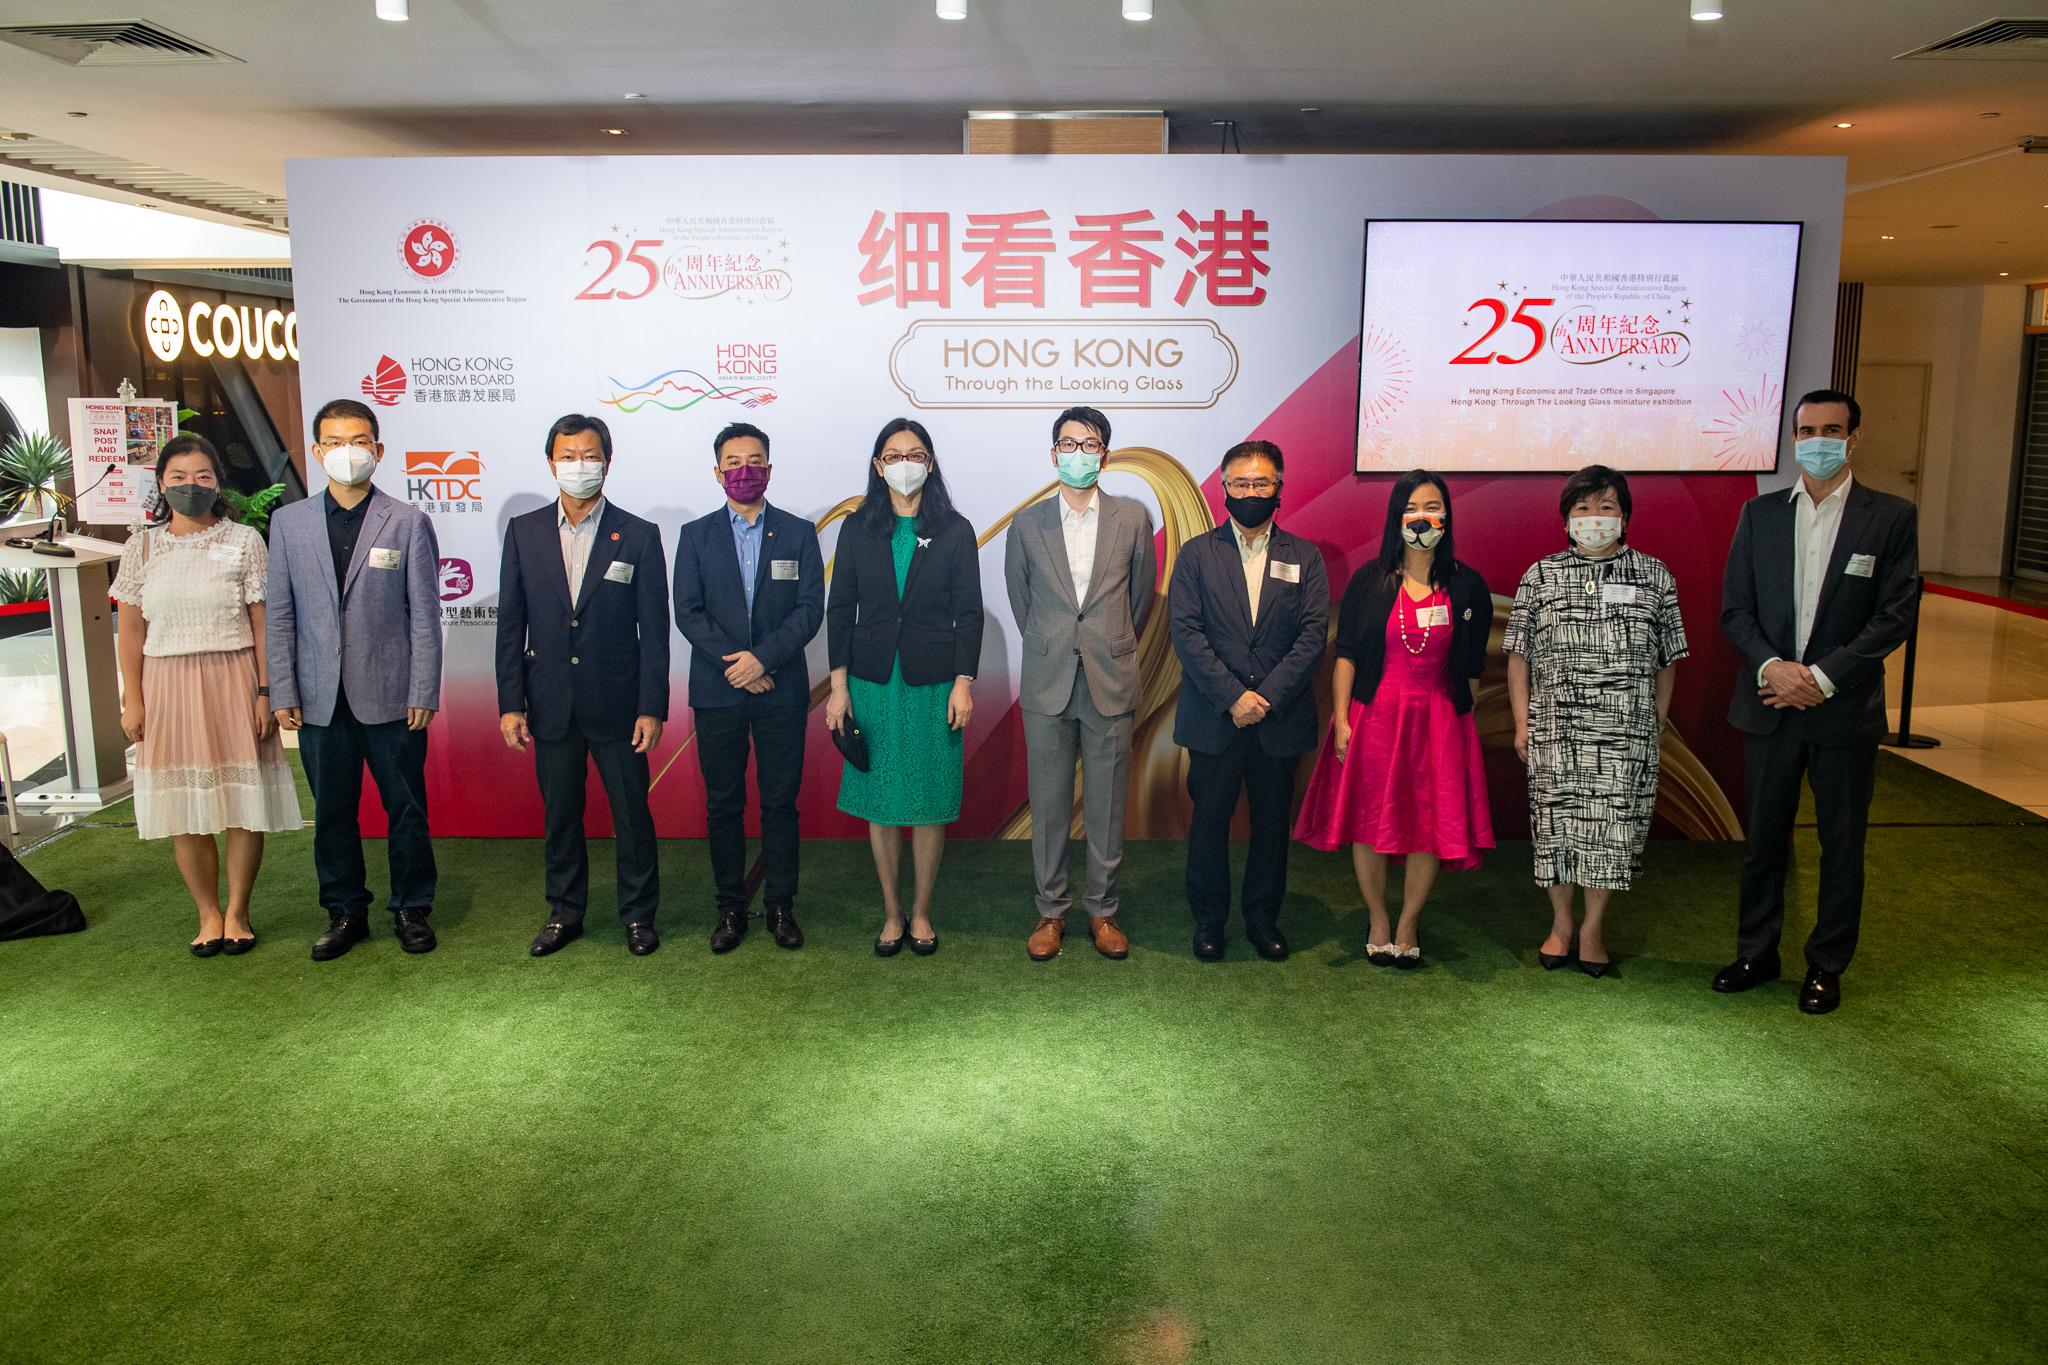 The "Hong Kong: Through the Looking Glass" miniature exhibition organised by the Hong Kong Economic and Trade Office in Singapore opened in Singapore today (April 4). Photo shows the Director of the Hong Kong Economic and Trade Office in Singapore, Mr Wong Chun To (fifth right), picturing with Counsellor of Economic and Commercial Office, Ms Zhong Manying (fifth left). 

